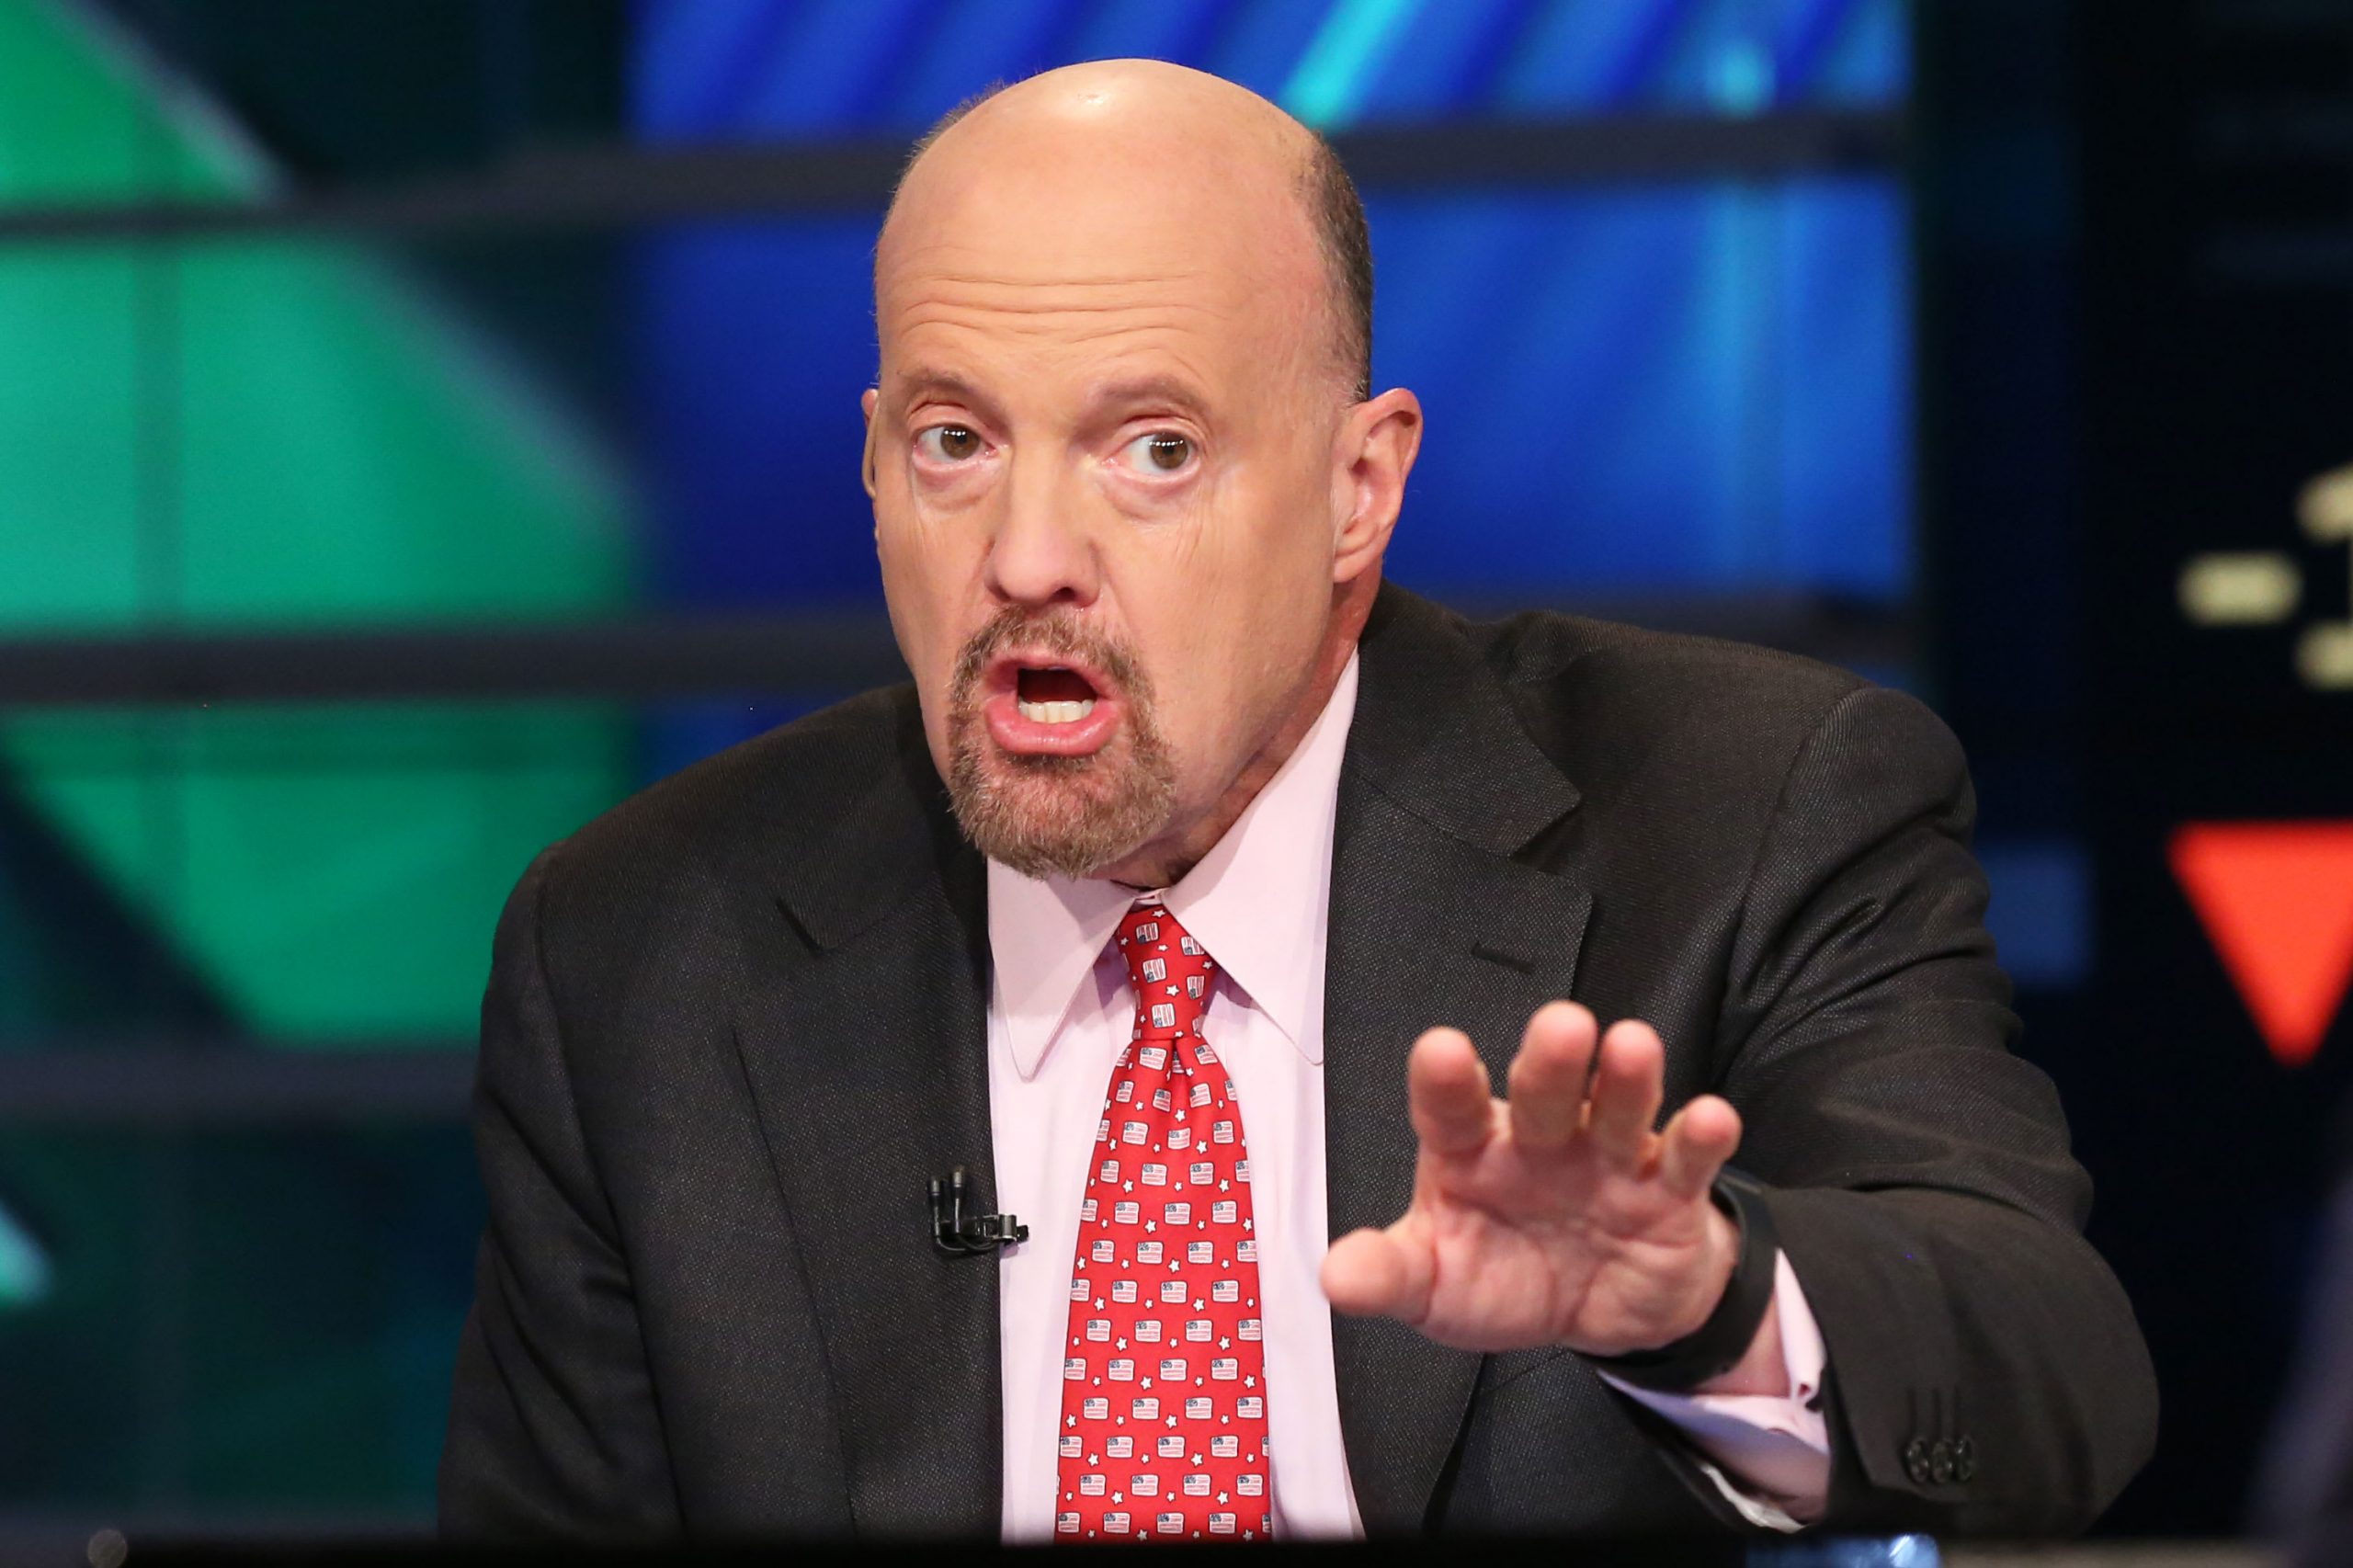 Jim Cramer says it is laborious to purchase shares with Covid outbreak worsening